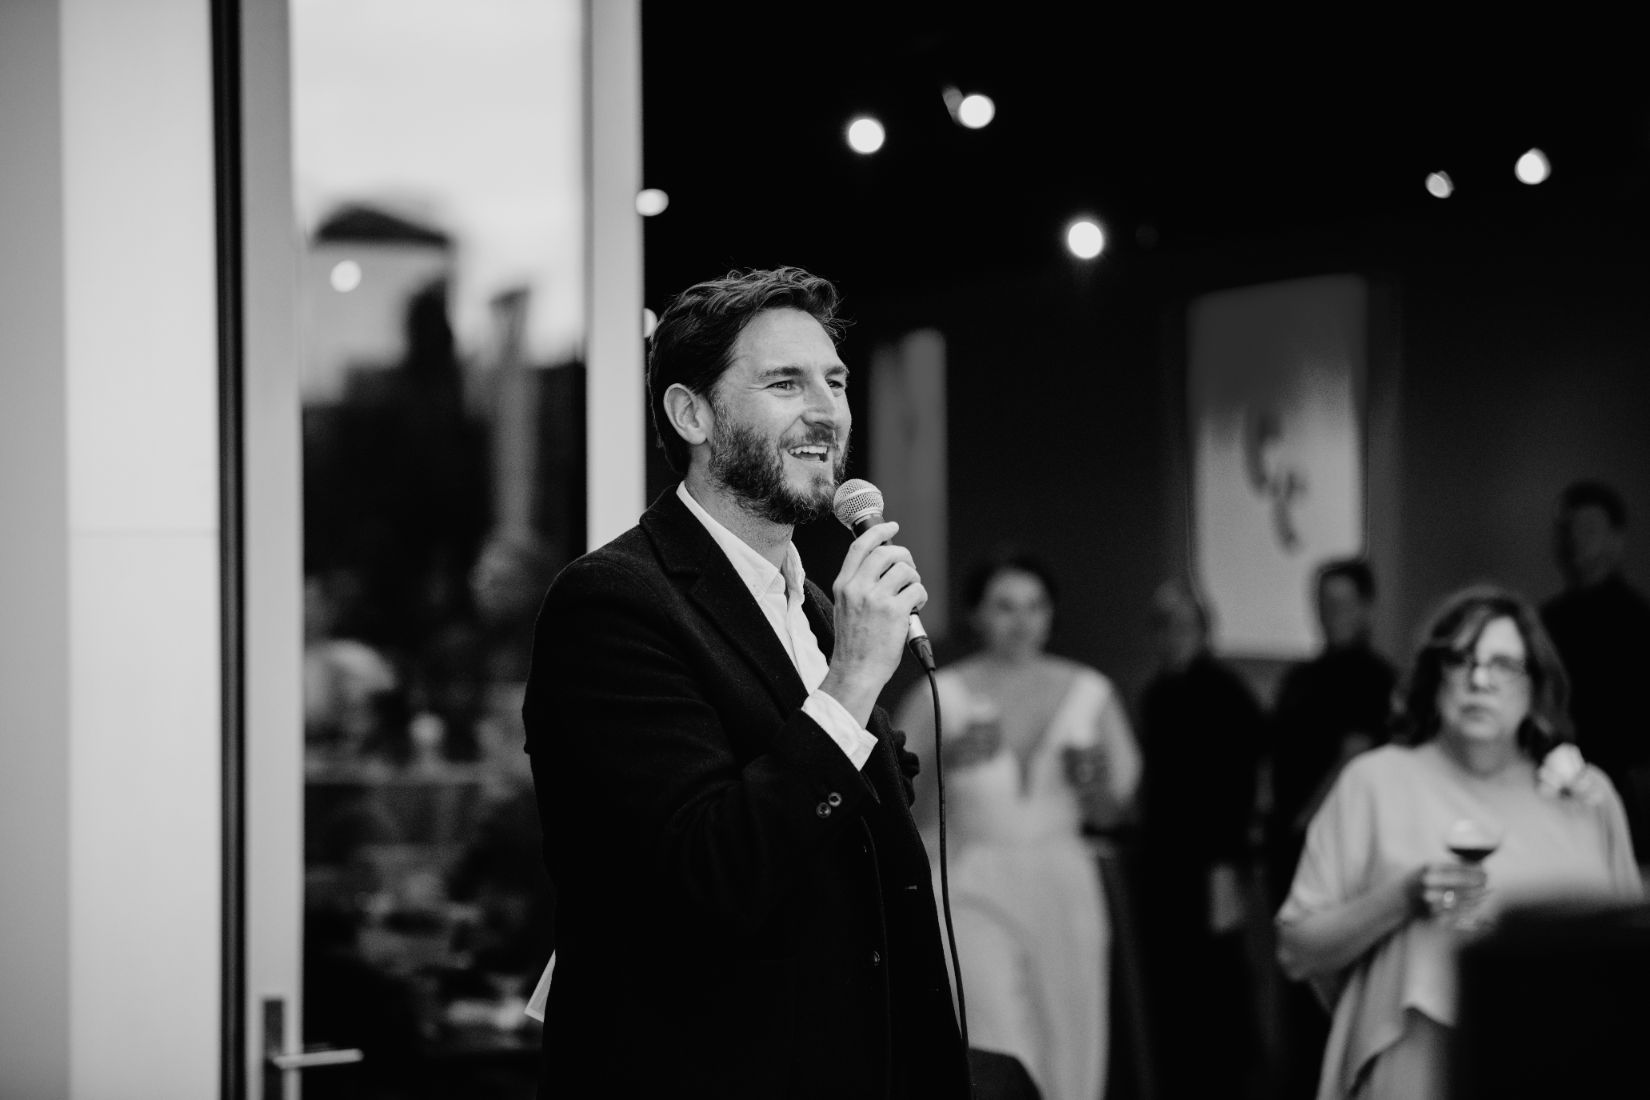 wedding toast given by wedding guest in black and white